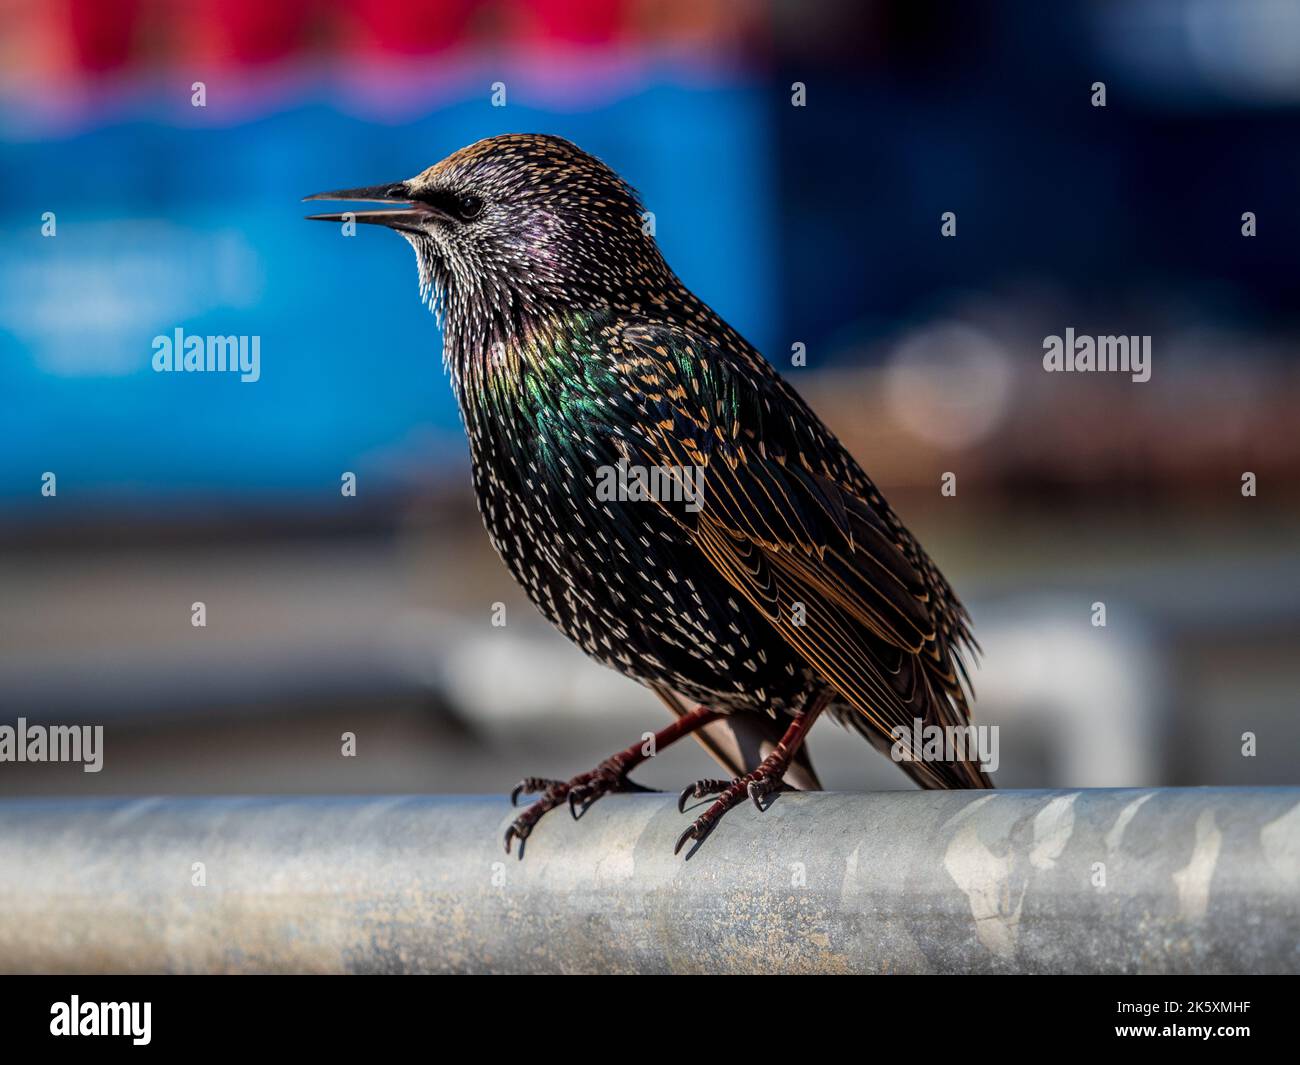 Starling on a fence - Common Starling or European Starling - Sturnus vulgaris Stock Photo